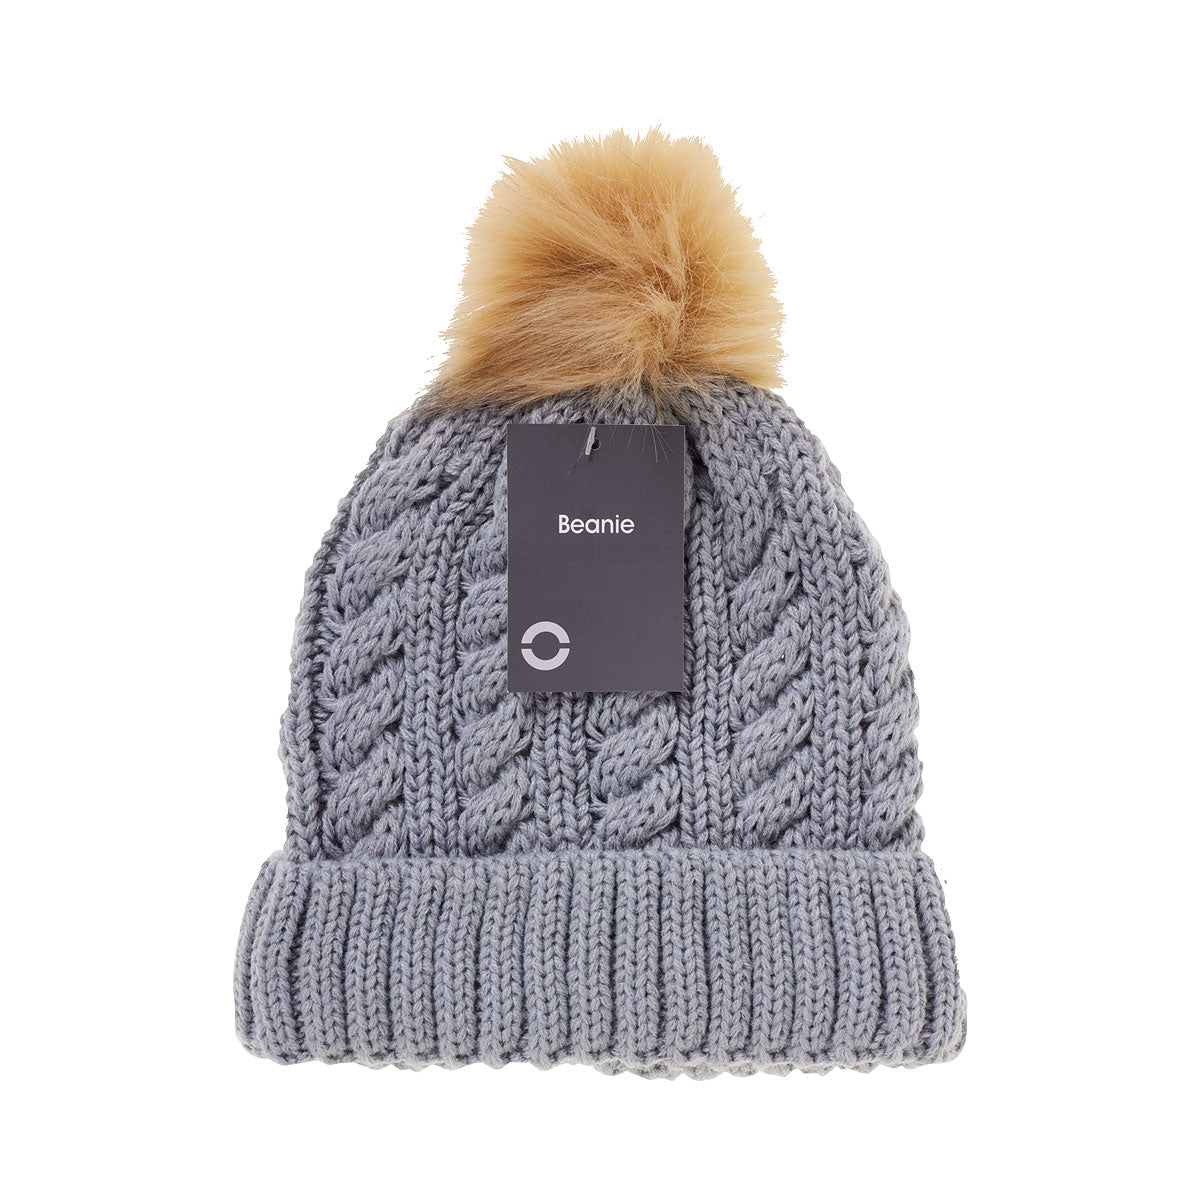 Cable Beanie With Pom Pom Black/Charcoal